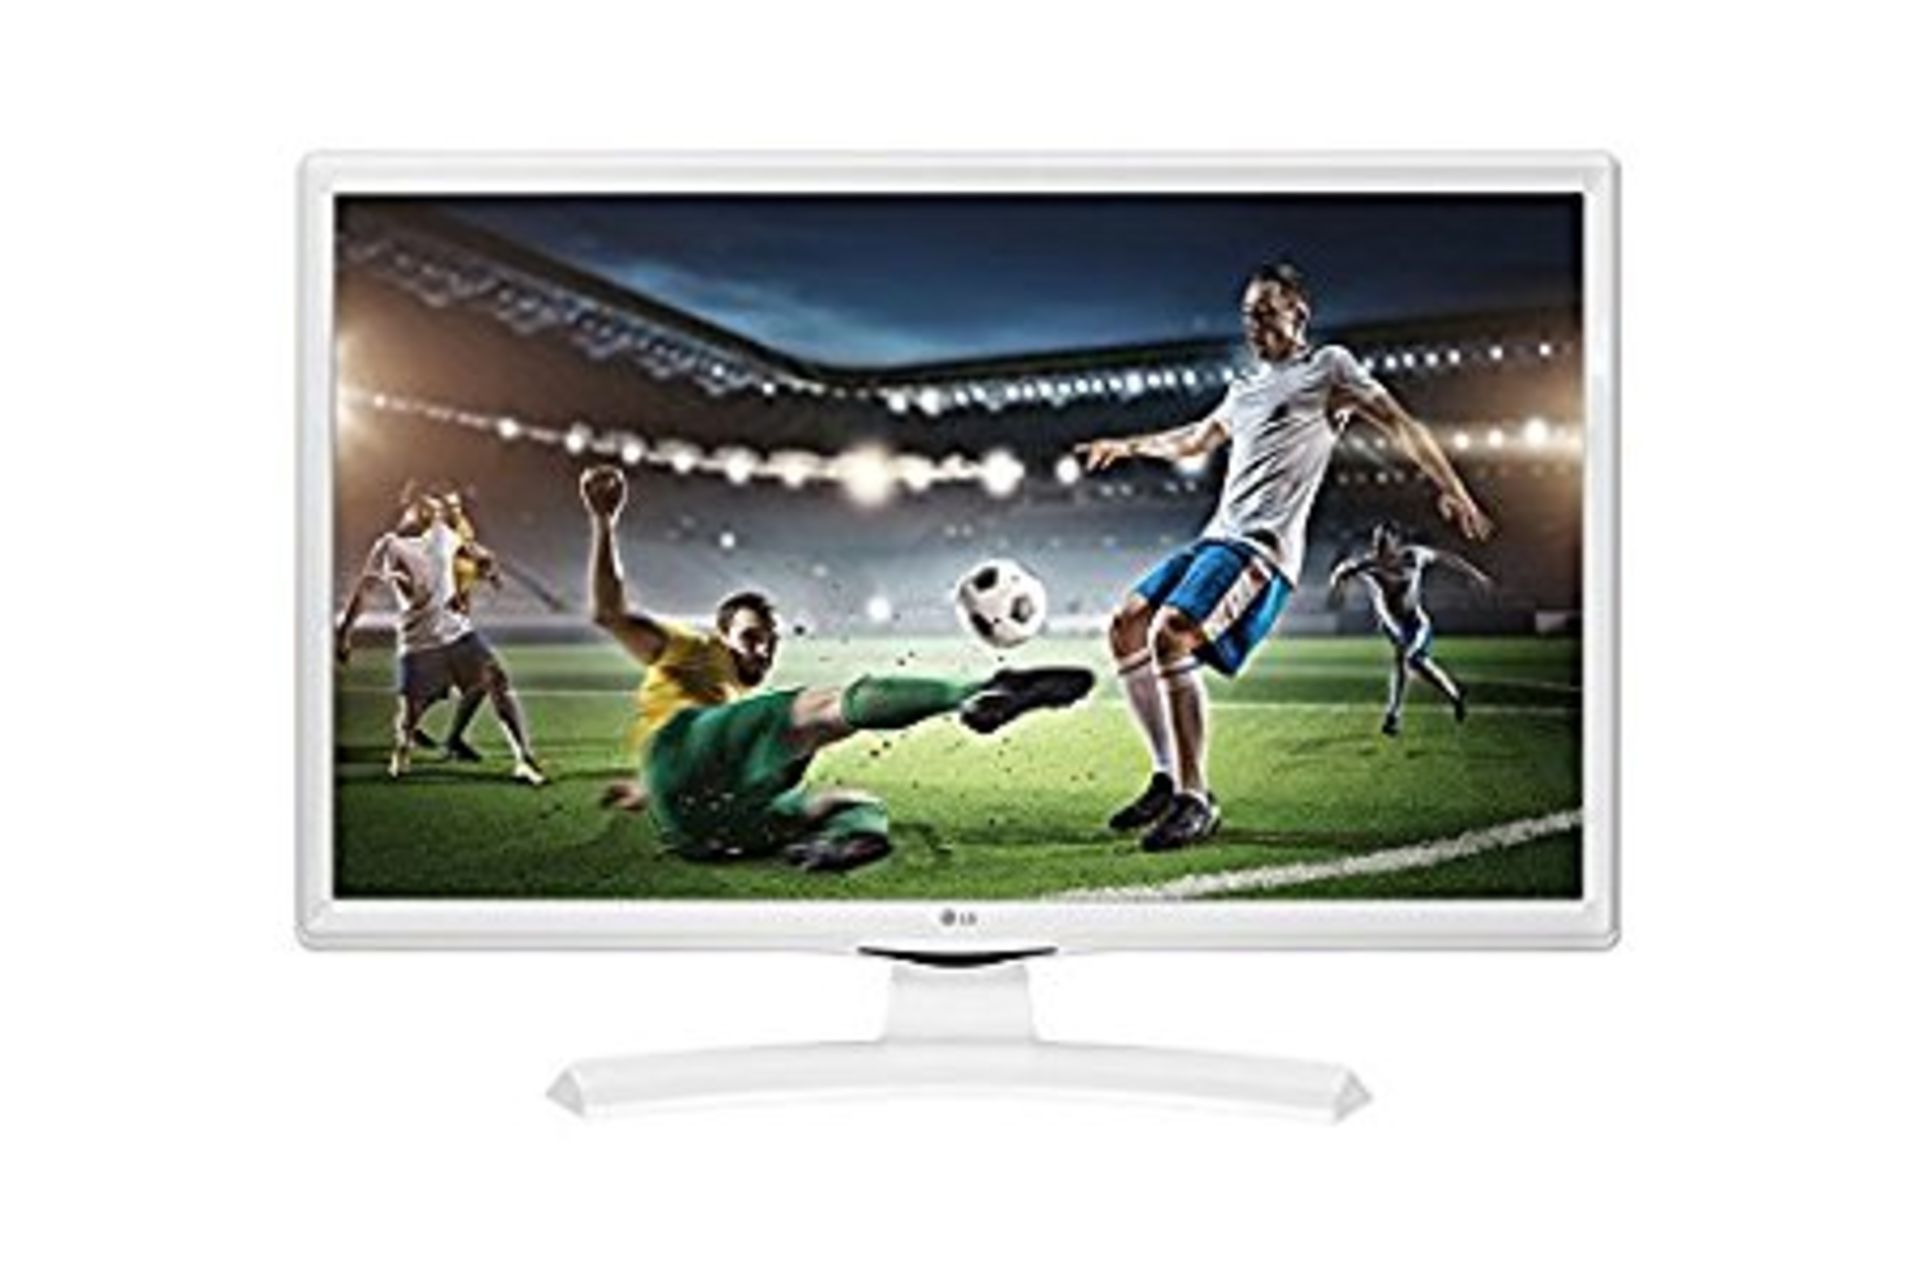 V Grade A LG 24 Inch HD READY LED TV WITH FREEVIEW - WHITE 24MT49VW-WZ